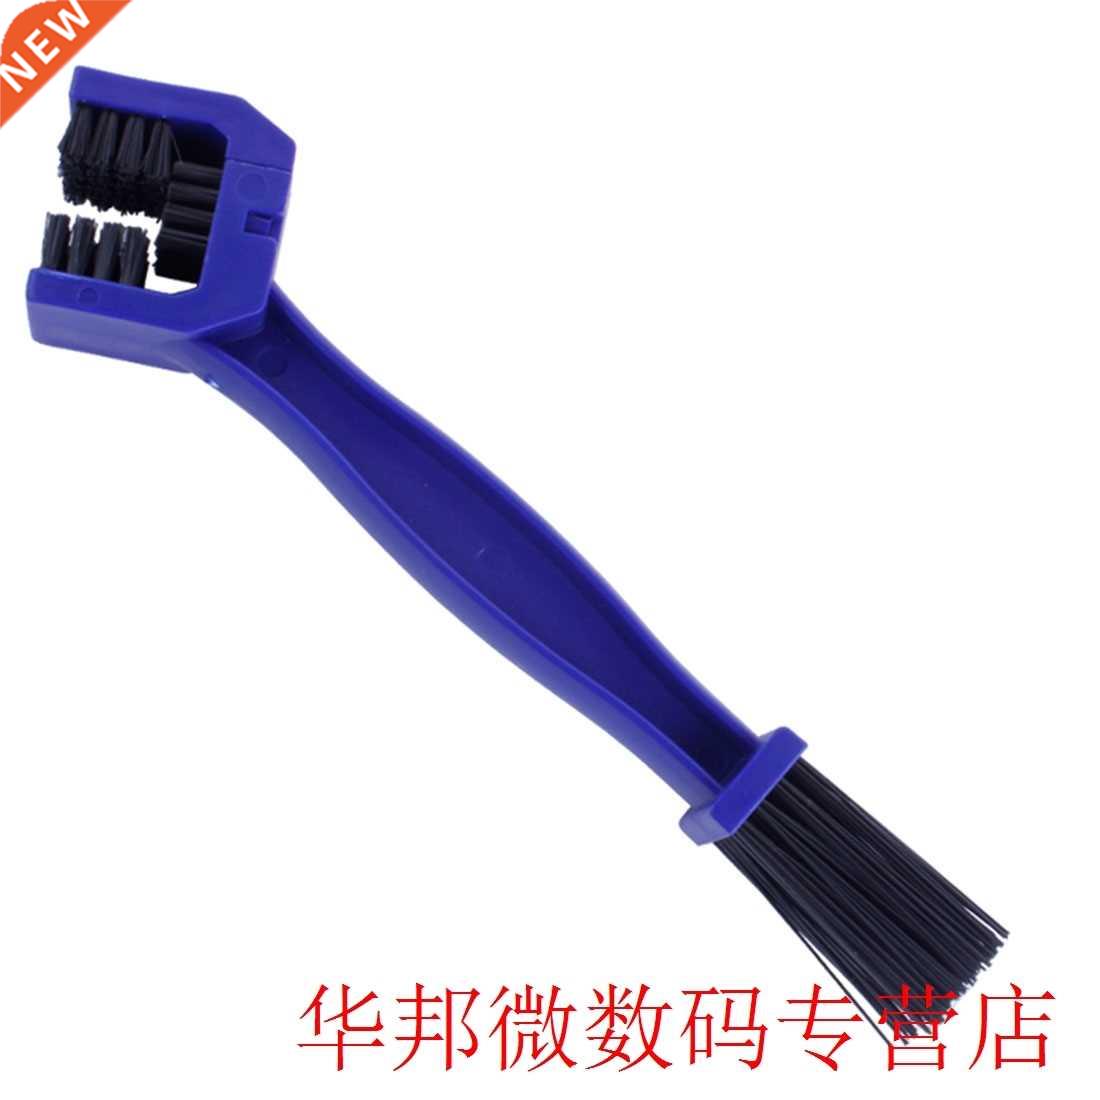 Bicycle Chain Clean Brush Gear Grunge Brush Cleaner 1pcs Cy